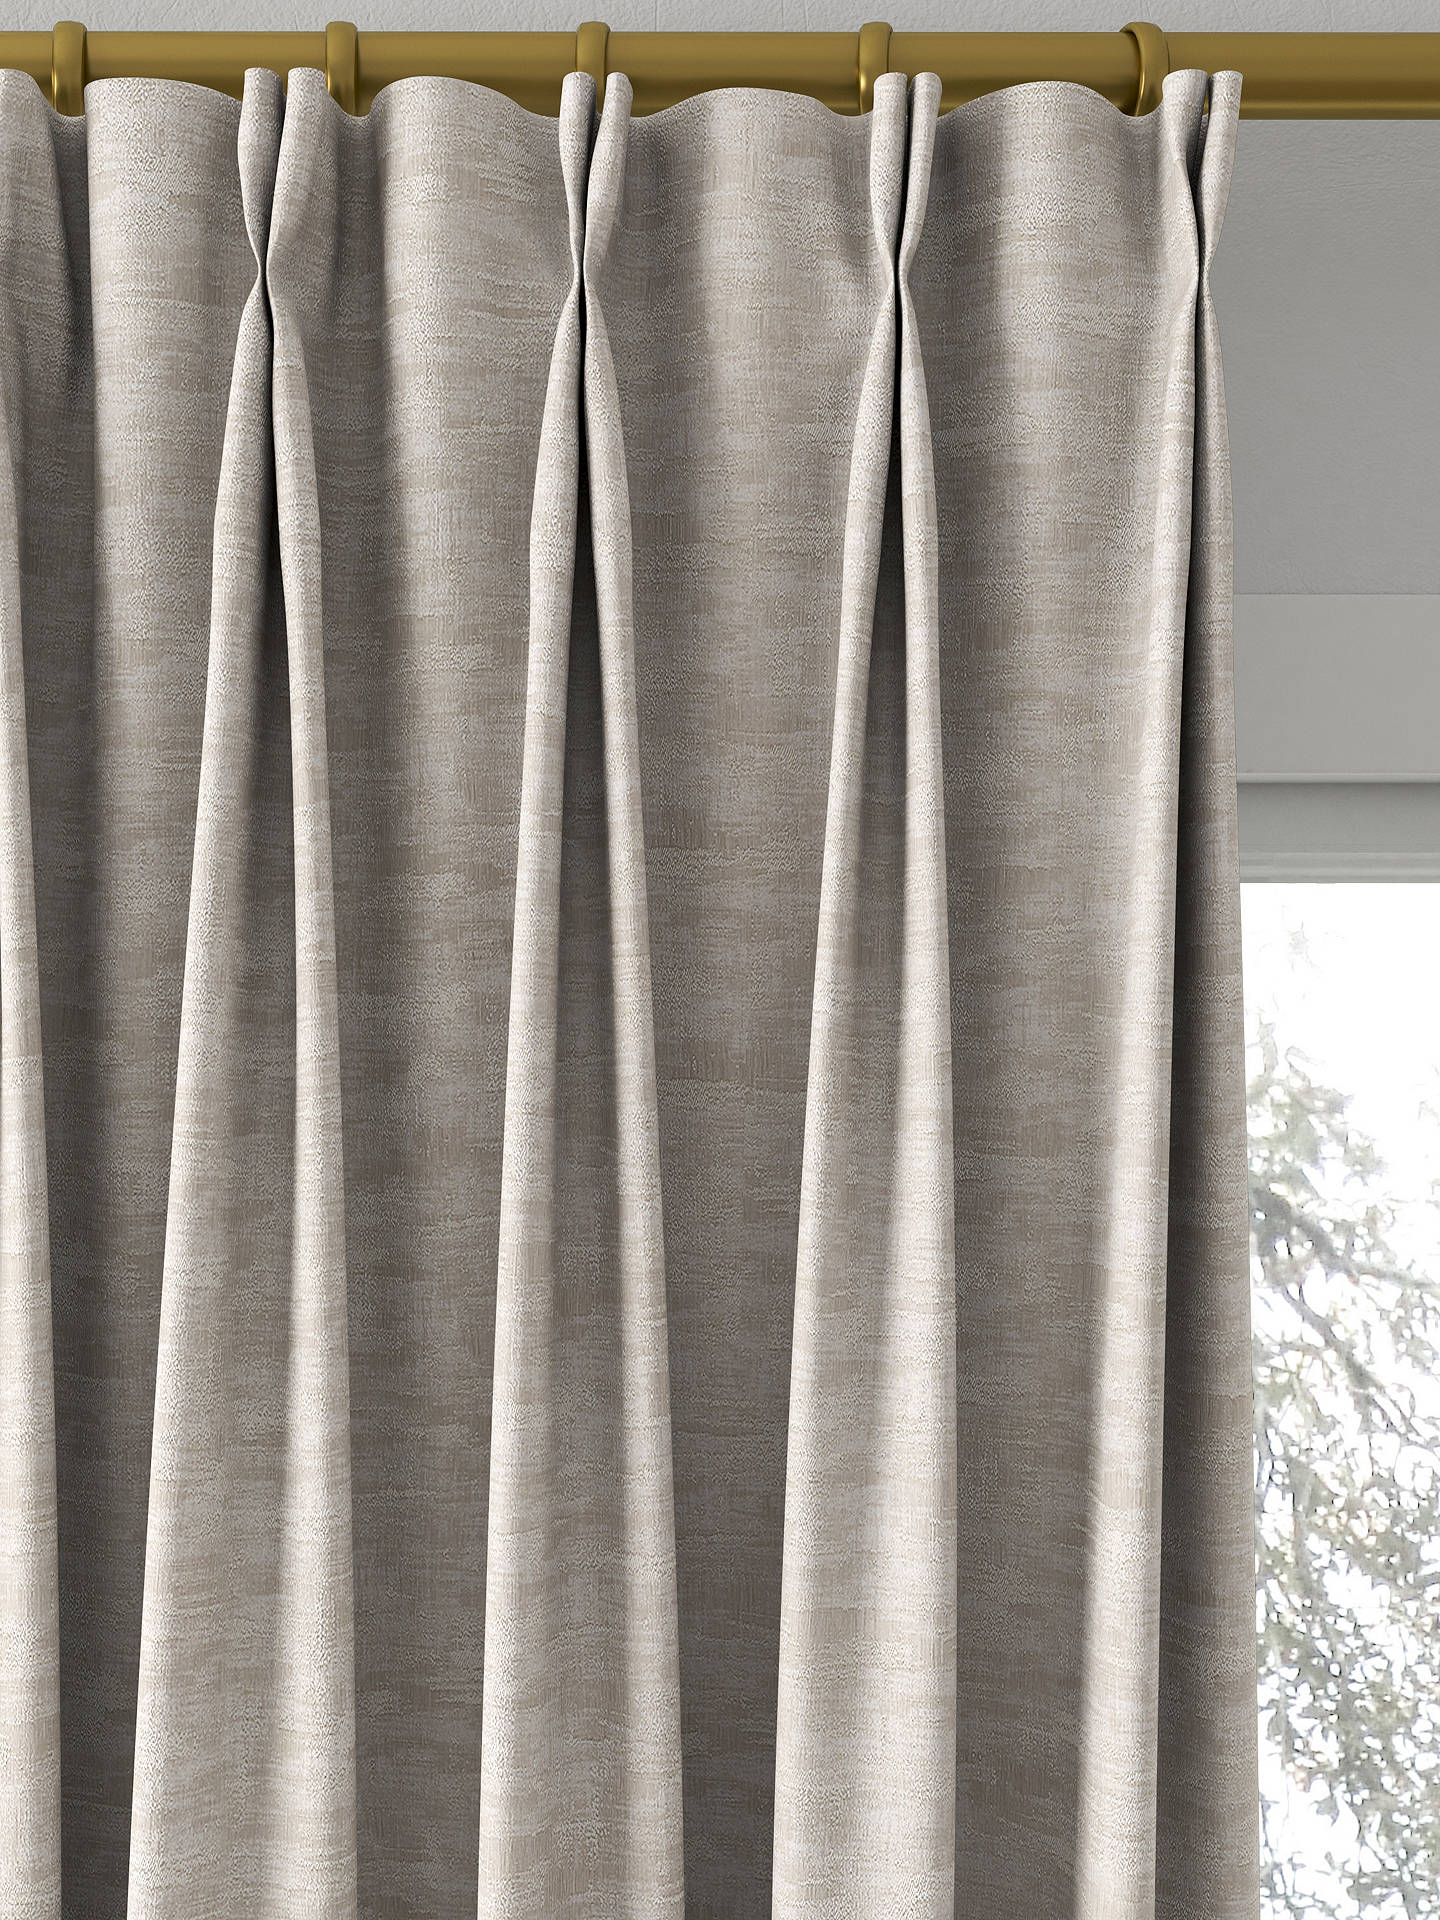 Laura Ashley Whinfell Made to Measure Curtains, Natural